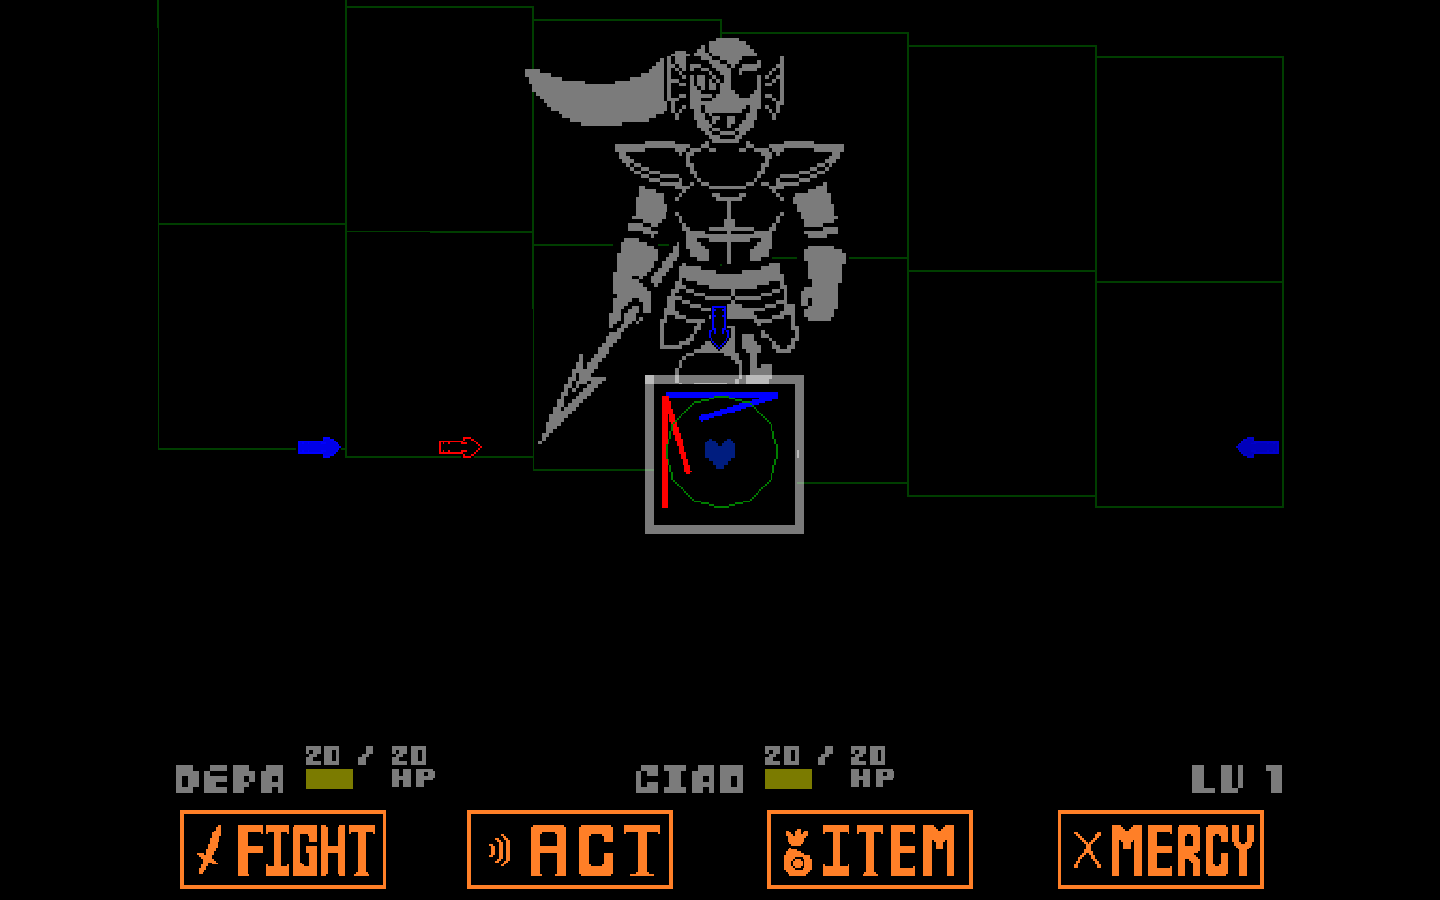 Version 1.08 of Undertale uploaded to Steam yesterday, under the